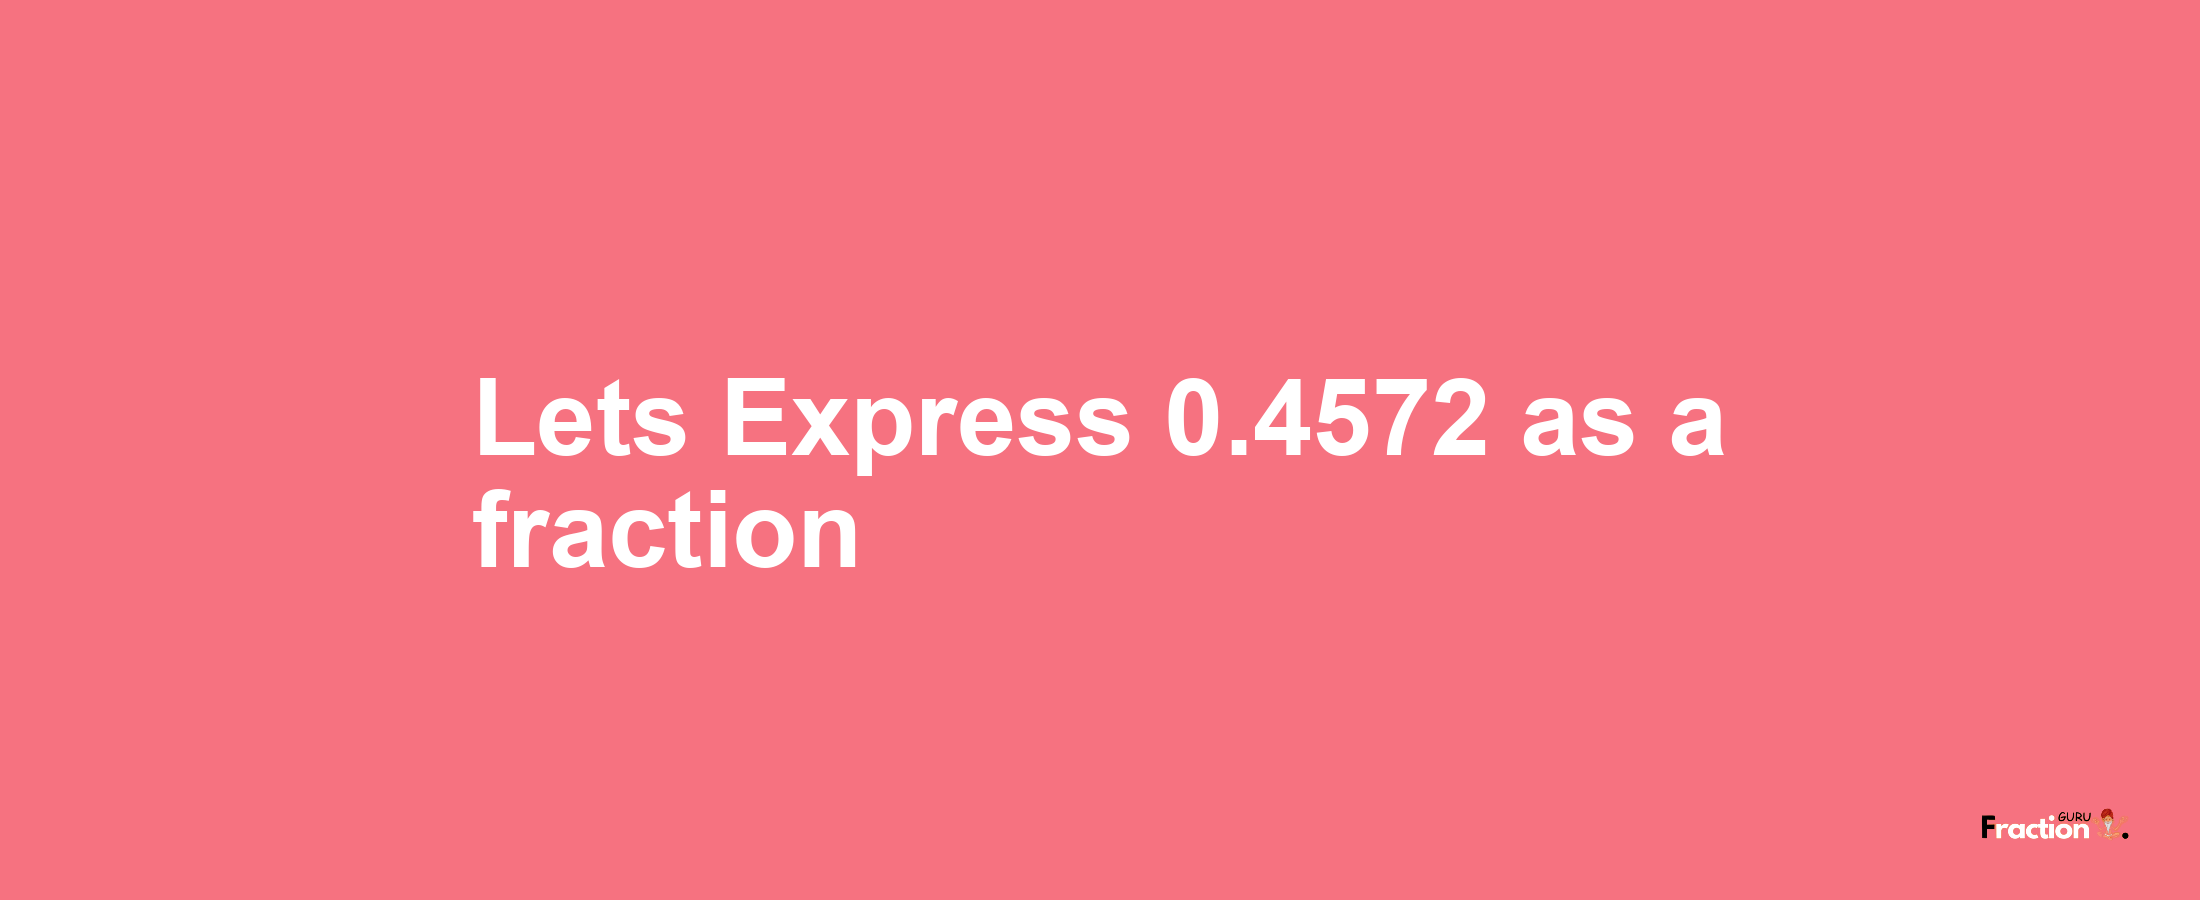 Lets Express 0.4572 as afraction